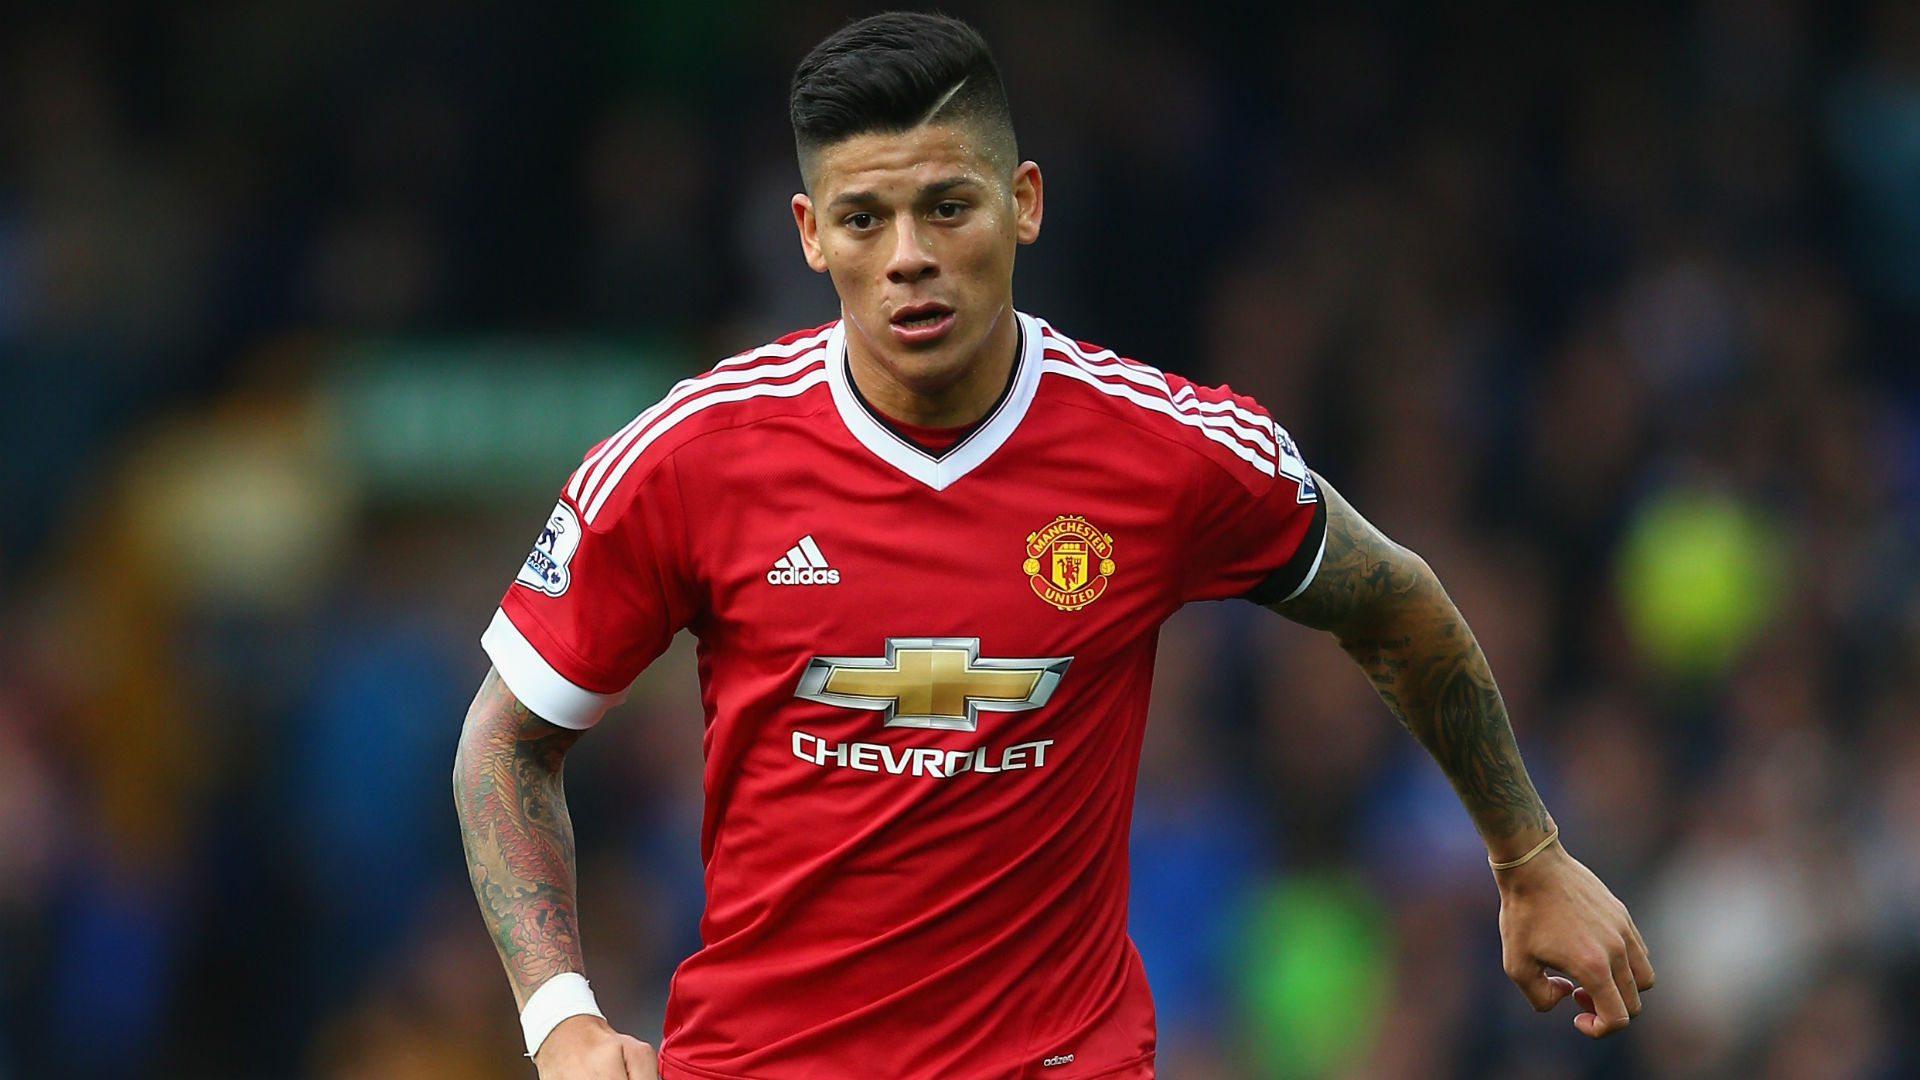 Manchester United defender Marcos Rojo in action. (Getty Images)